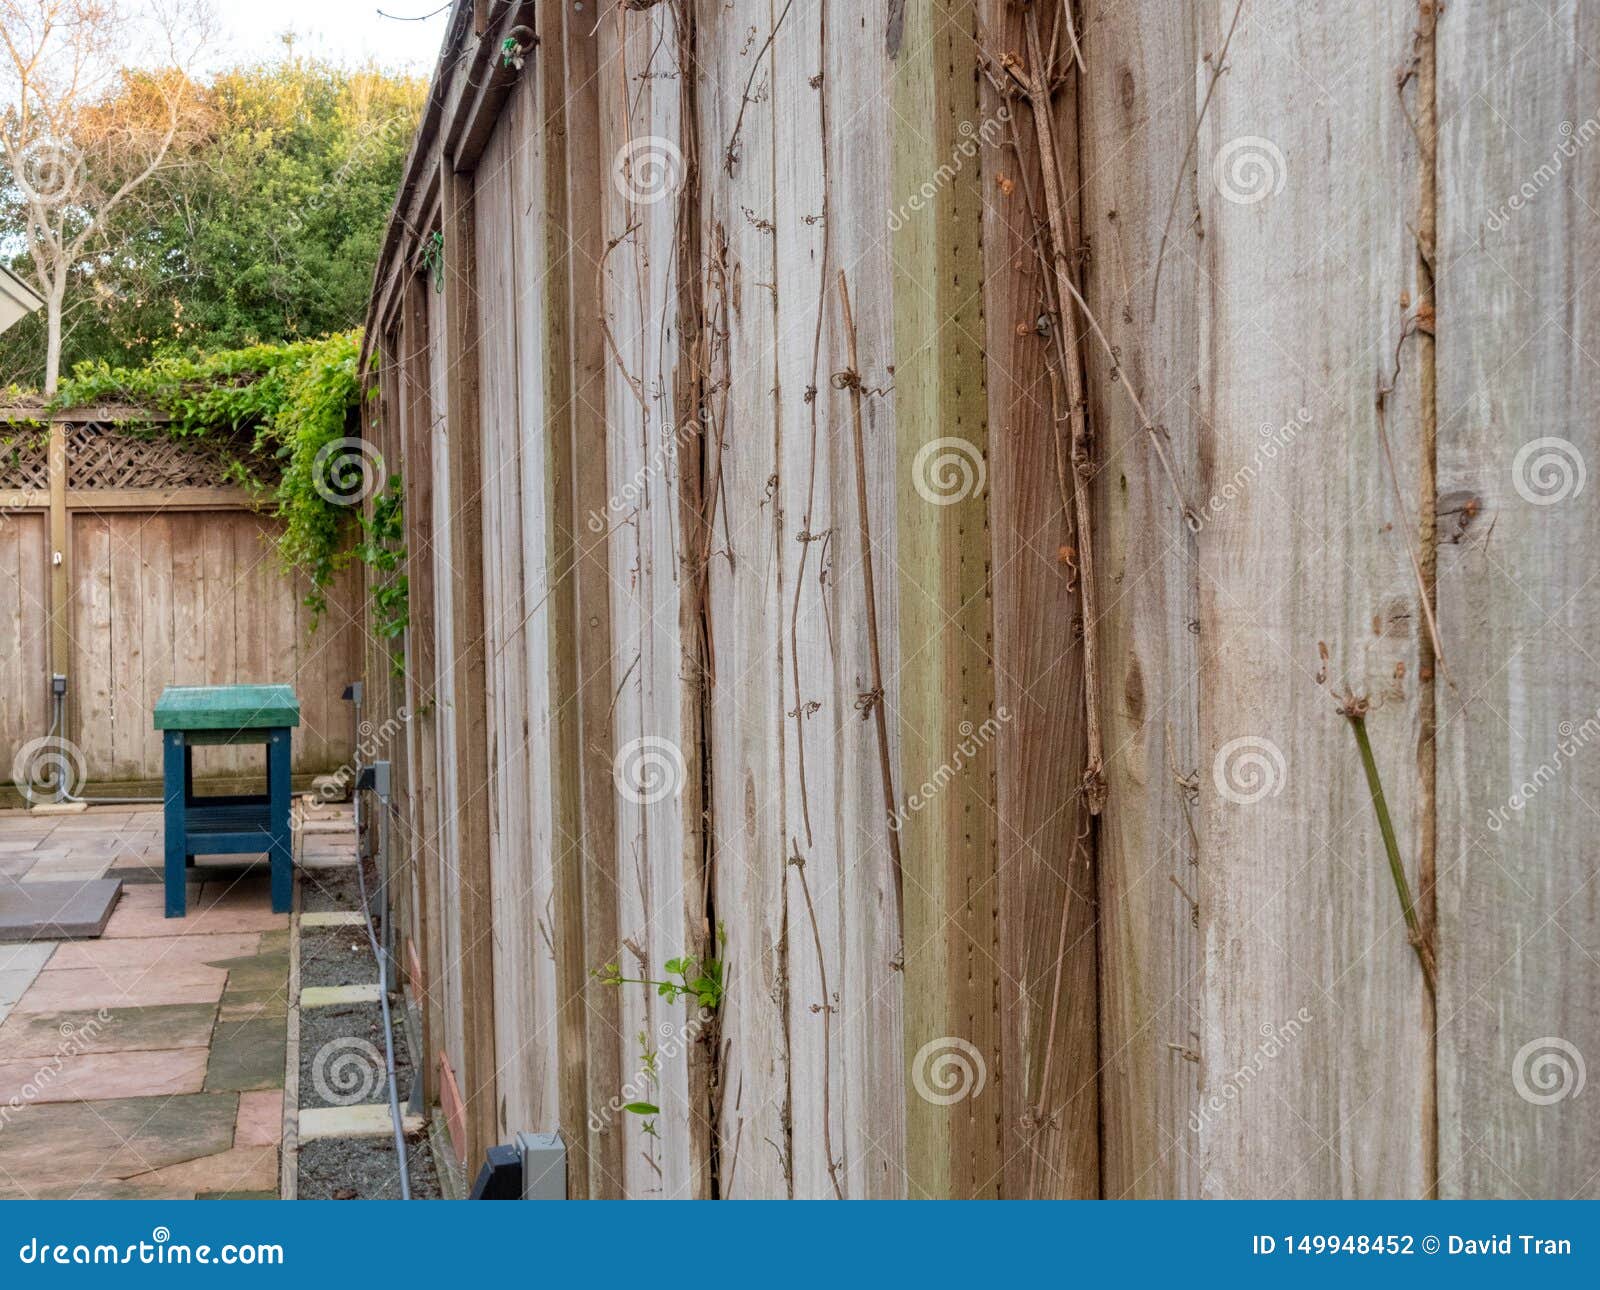 View Of Wooden Fence In Backyard With Enclosed Gardening ...